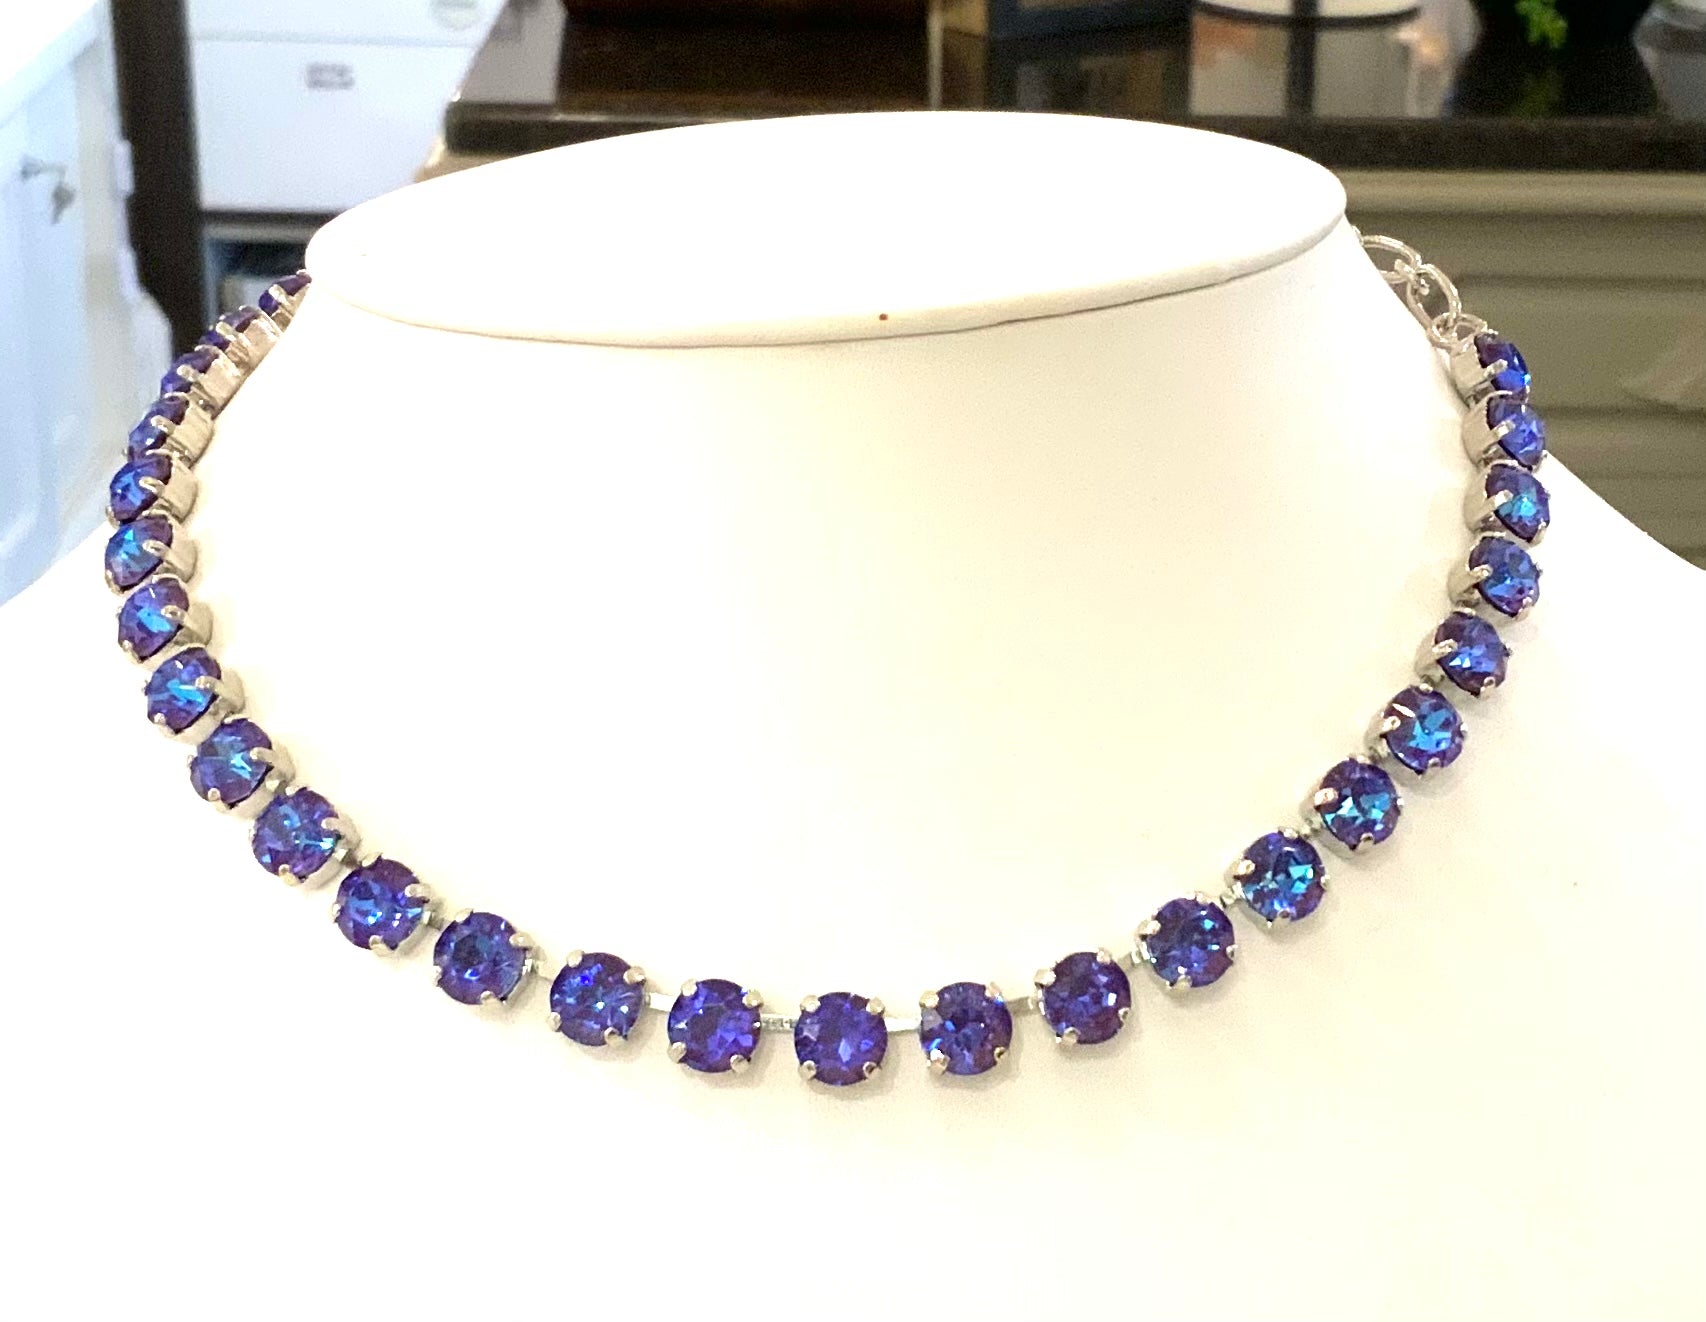 Mariana Rhodium Plated Must-Have Everyday Crystal Necklace in Sun-Kissed “Plum”